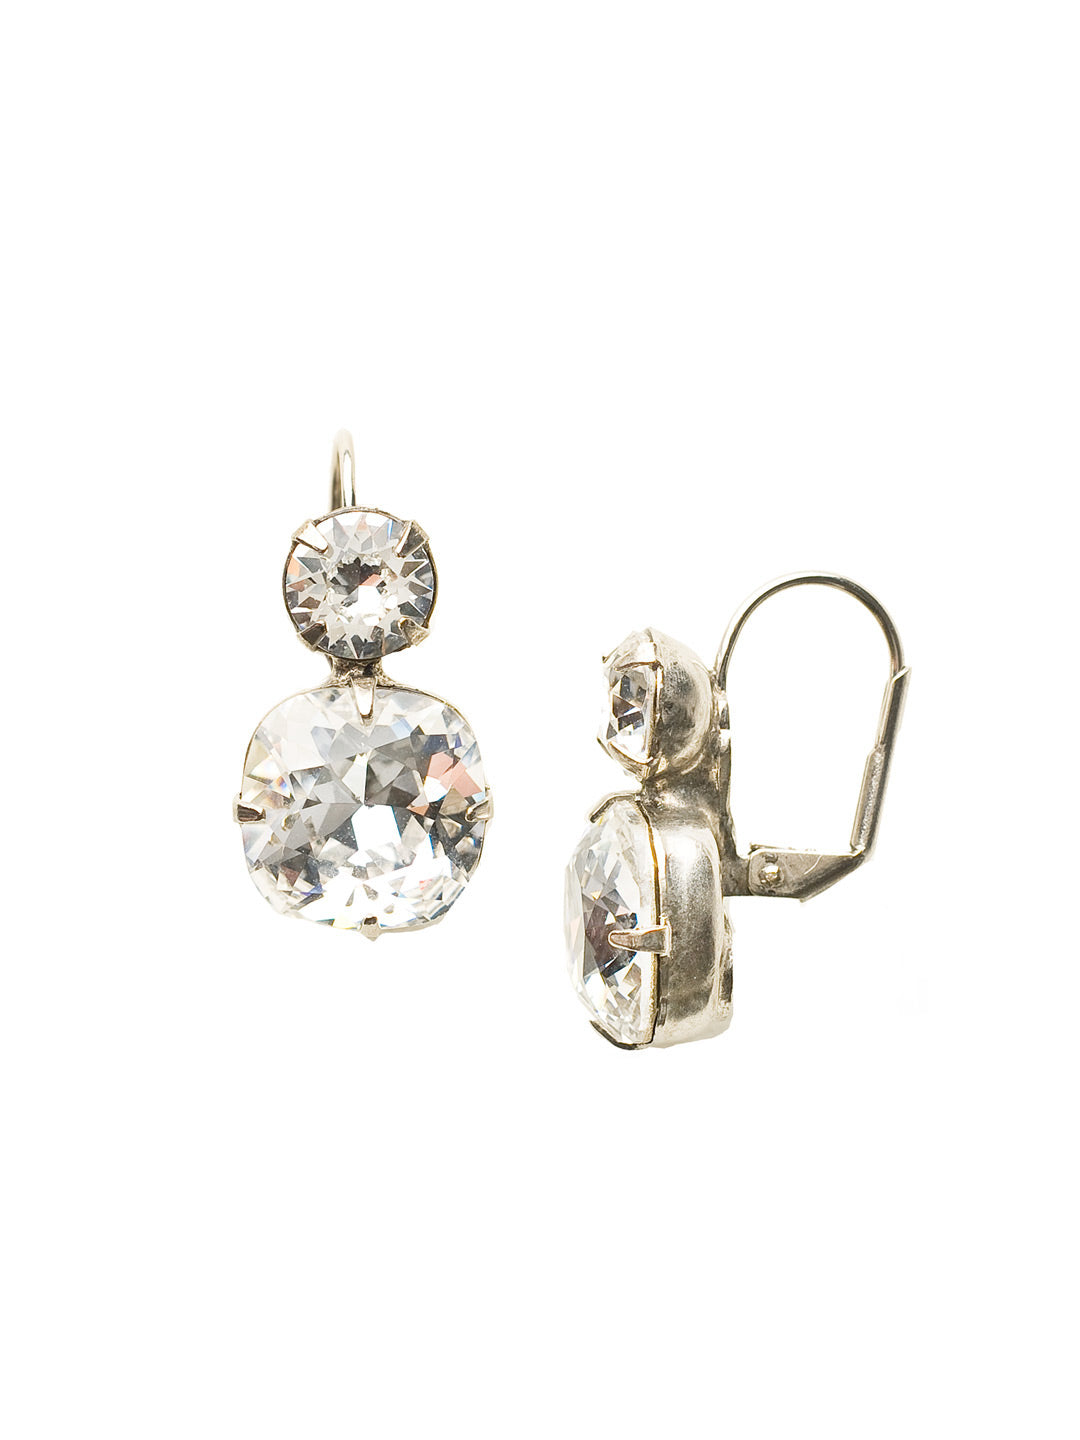 On The Edge Dangle Earrings - ECL4ASCRY - <p>It's simple - round and cushion cut crystals on a french wire earring. These earrings go with anything! You can rest easy knowing you have the perfect go-to pair of earrings in your jewelry box. From Sorrelli's Crystal collection in our Antique Silver-tone finish.</p>